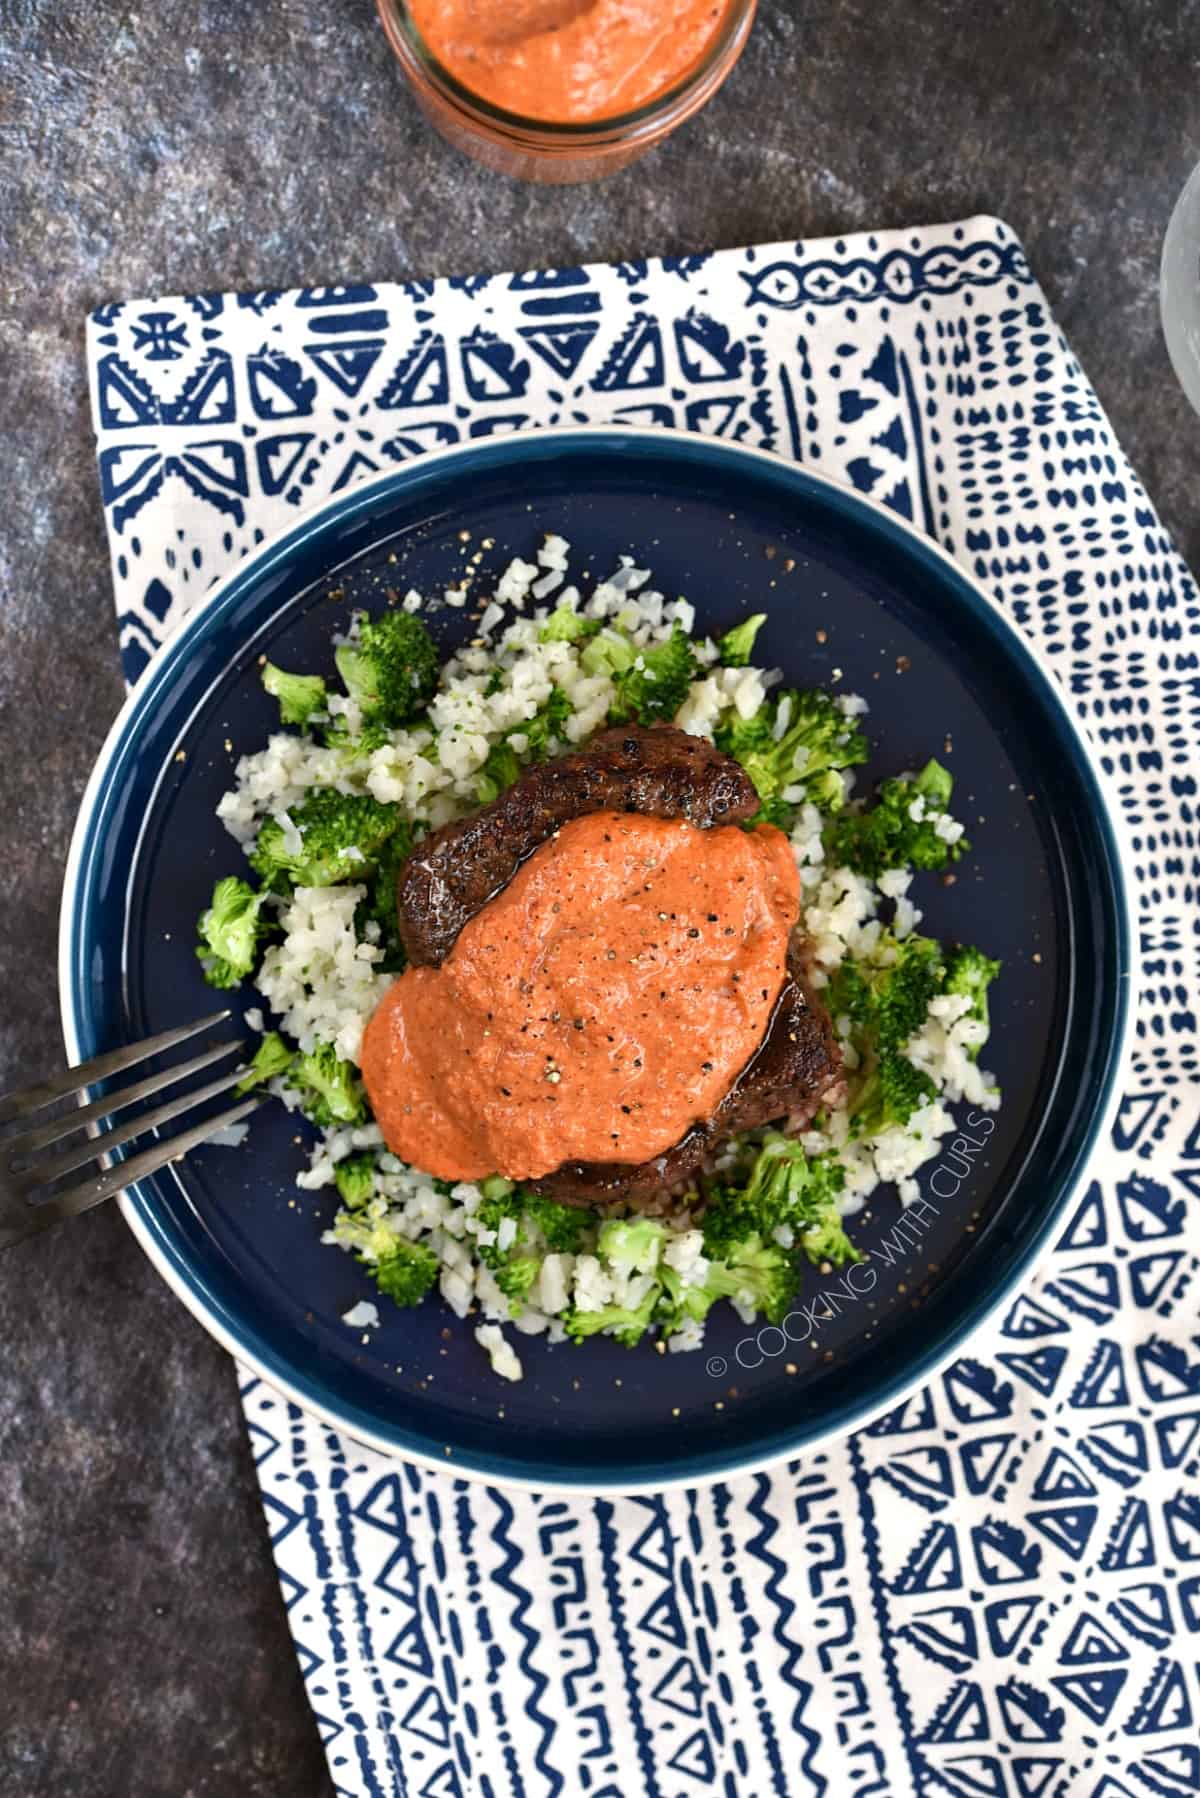 Looking down on a roasted Red Pepper Pesto Sauce topped steak on a bed of cauliflower and broccoli rice sitting on a blue plate.